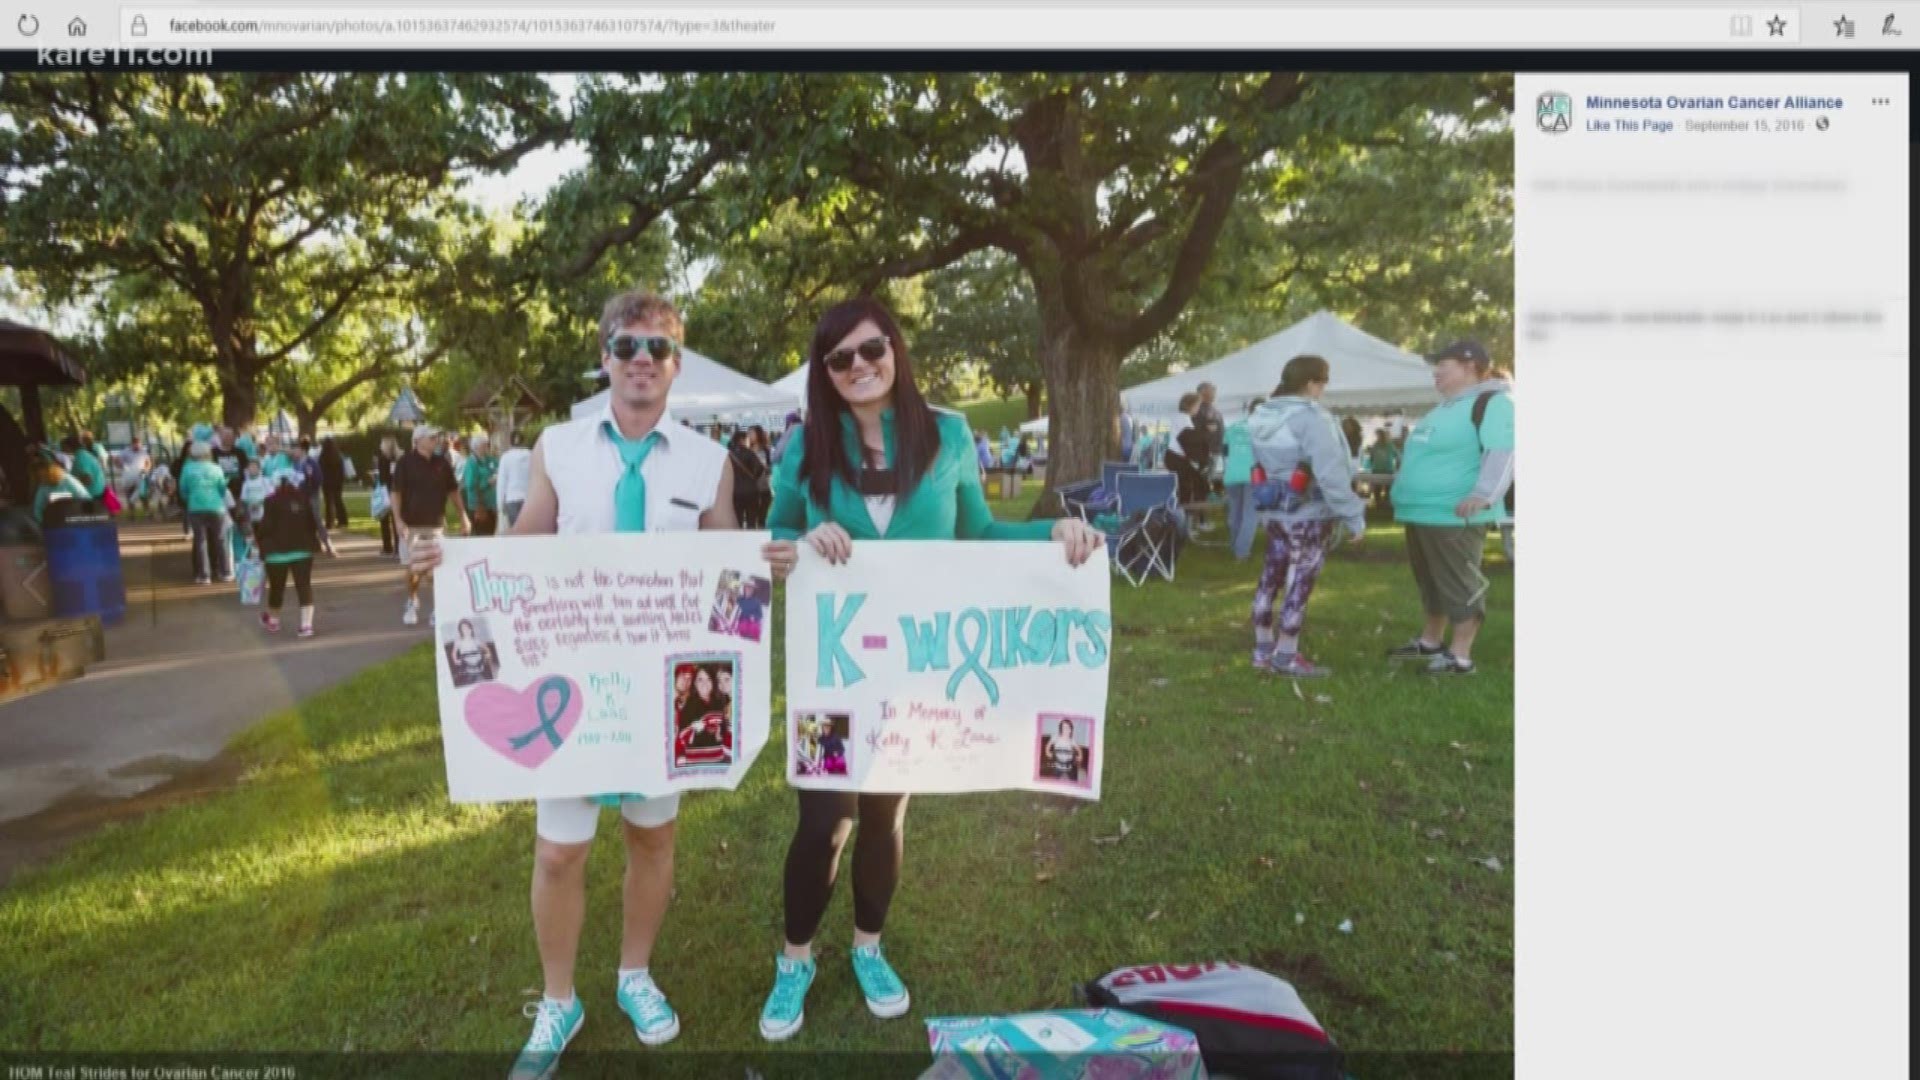 On Saturday, Sept. 15, MOCA hosts their largest annual fundraiser - HOM Teal Strides for Ovarian Cancer. The 5K run, 2K walk and Kids Fun Run is open to the public and is held at Rosland Park in Edina. https://kare11.tv/2CDNNhd